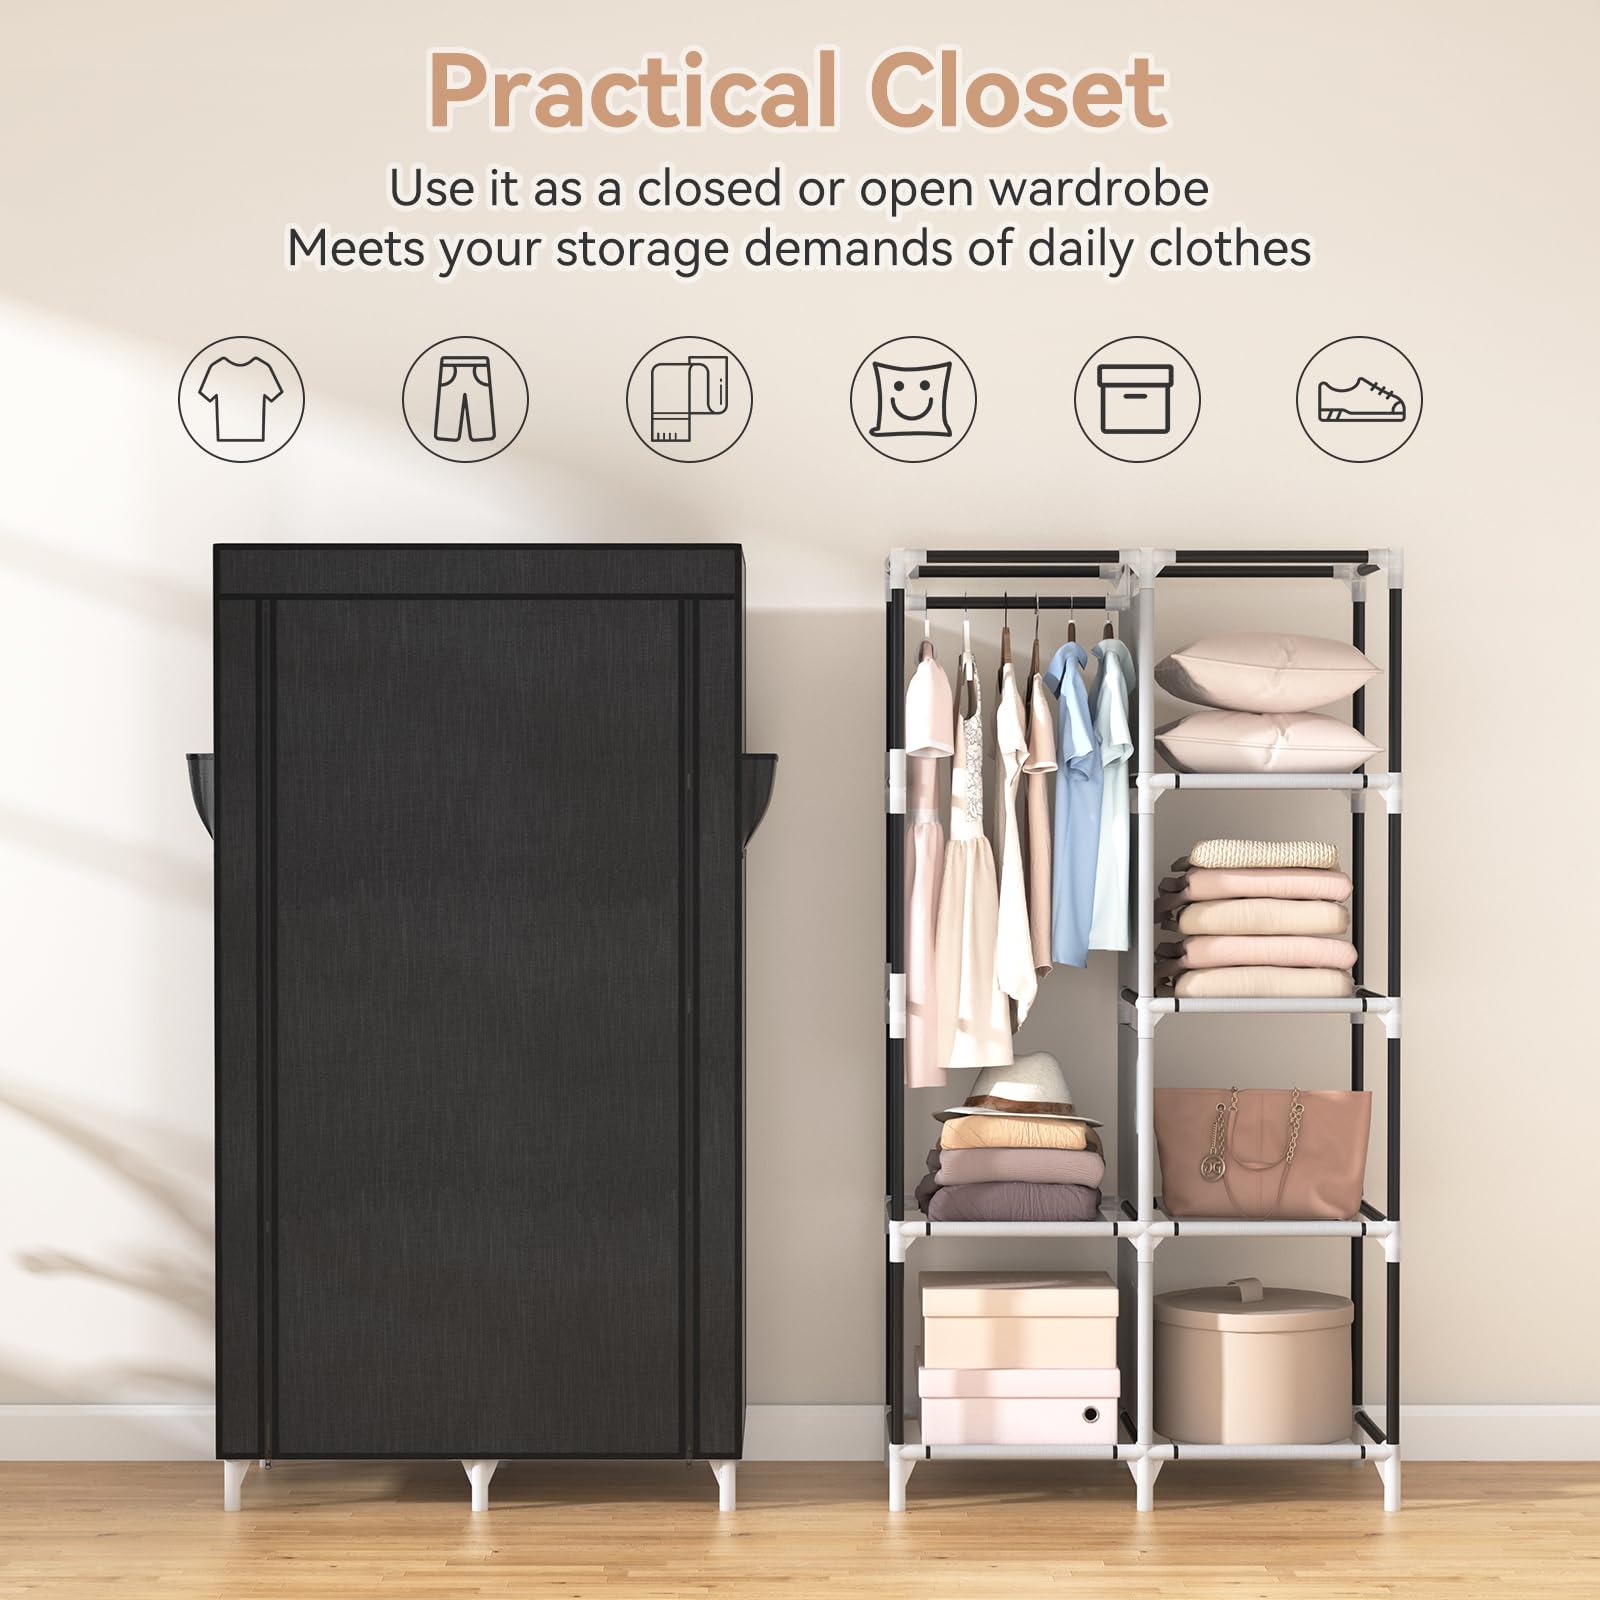 ROJASOP Portable Closet Wardrobe Closet for Hanging Clothes with 6 Storage Shelves, 1 Hanging Rod and 4 Pockets, Free Standing Closet Clothes Organizer for Bedroom, Sturdy and Easy Assemble